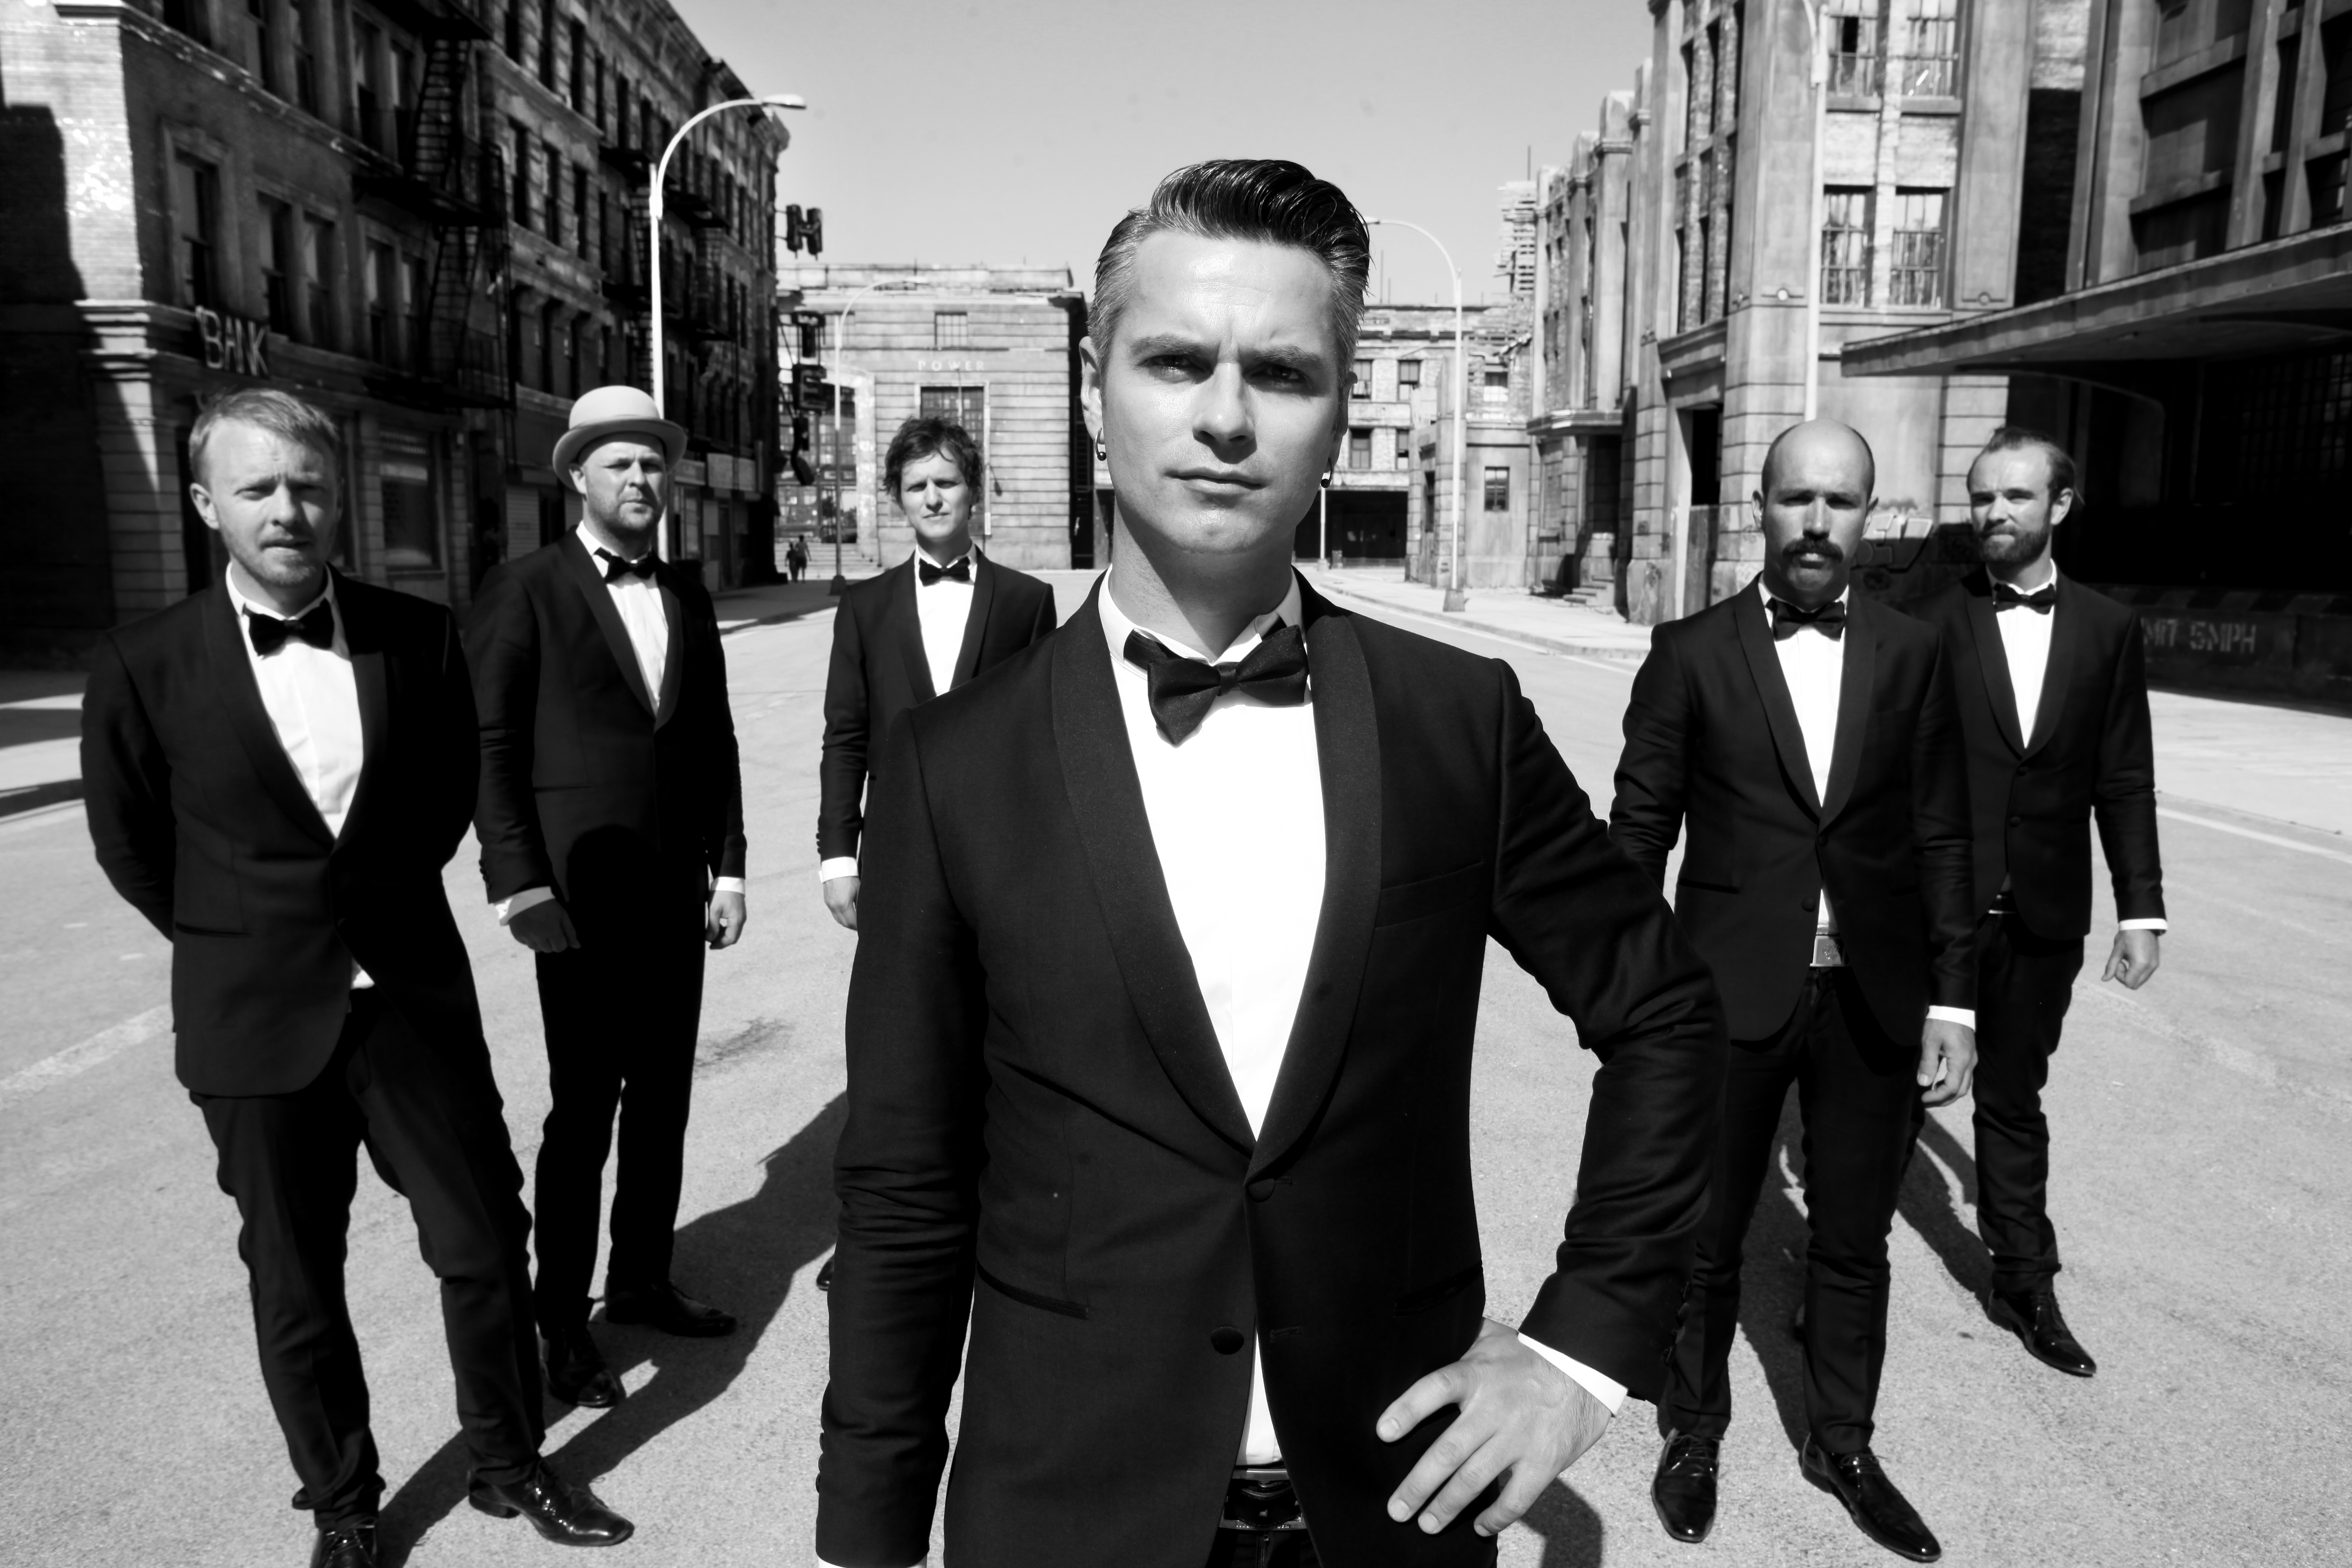 Kaizers Orchestra omsider til London